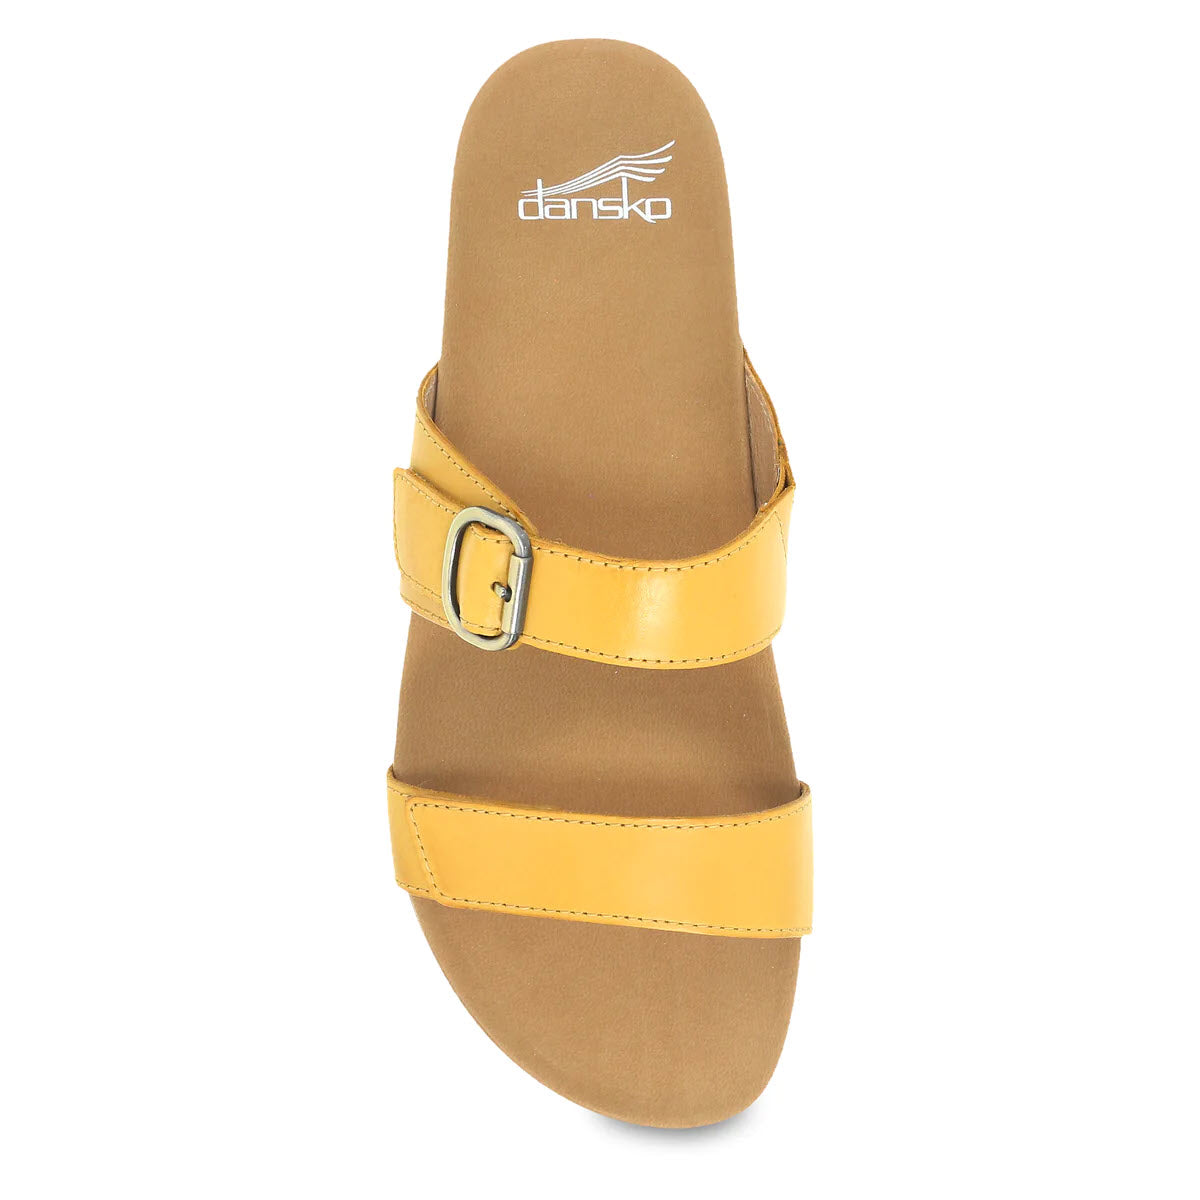 A top view of a yellow Dansko Justine slide sandal with two straps and a buckle, isolated on a white background.